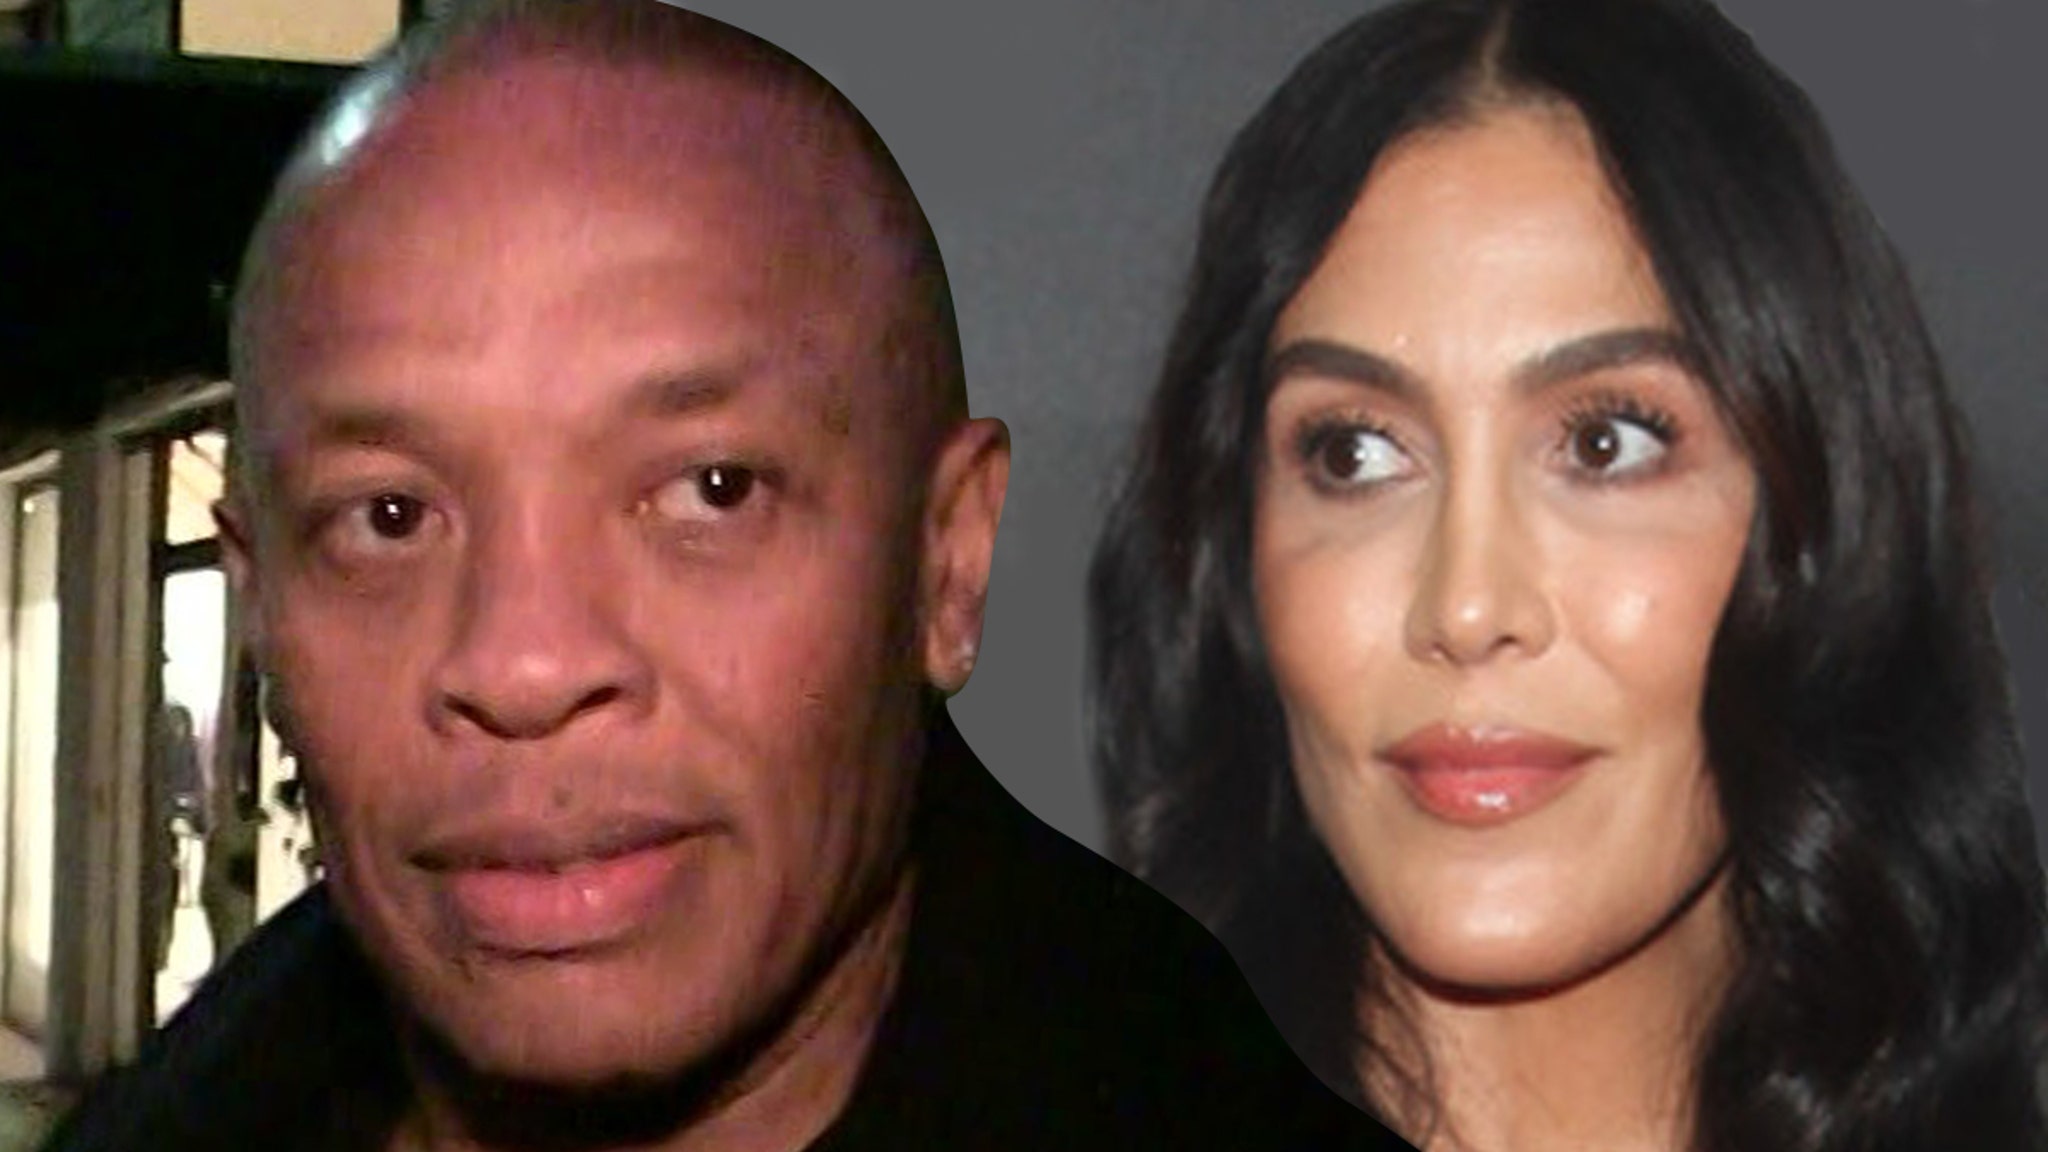 Dr. Dre agrees to pay the alienated wife $ 2 million in temporary support